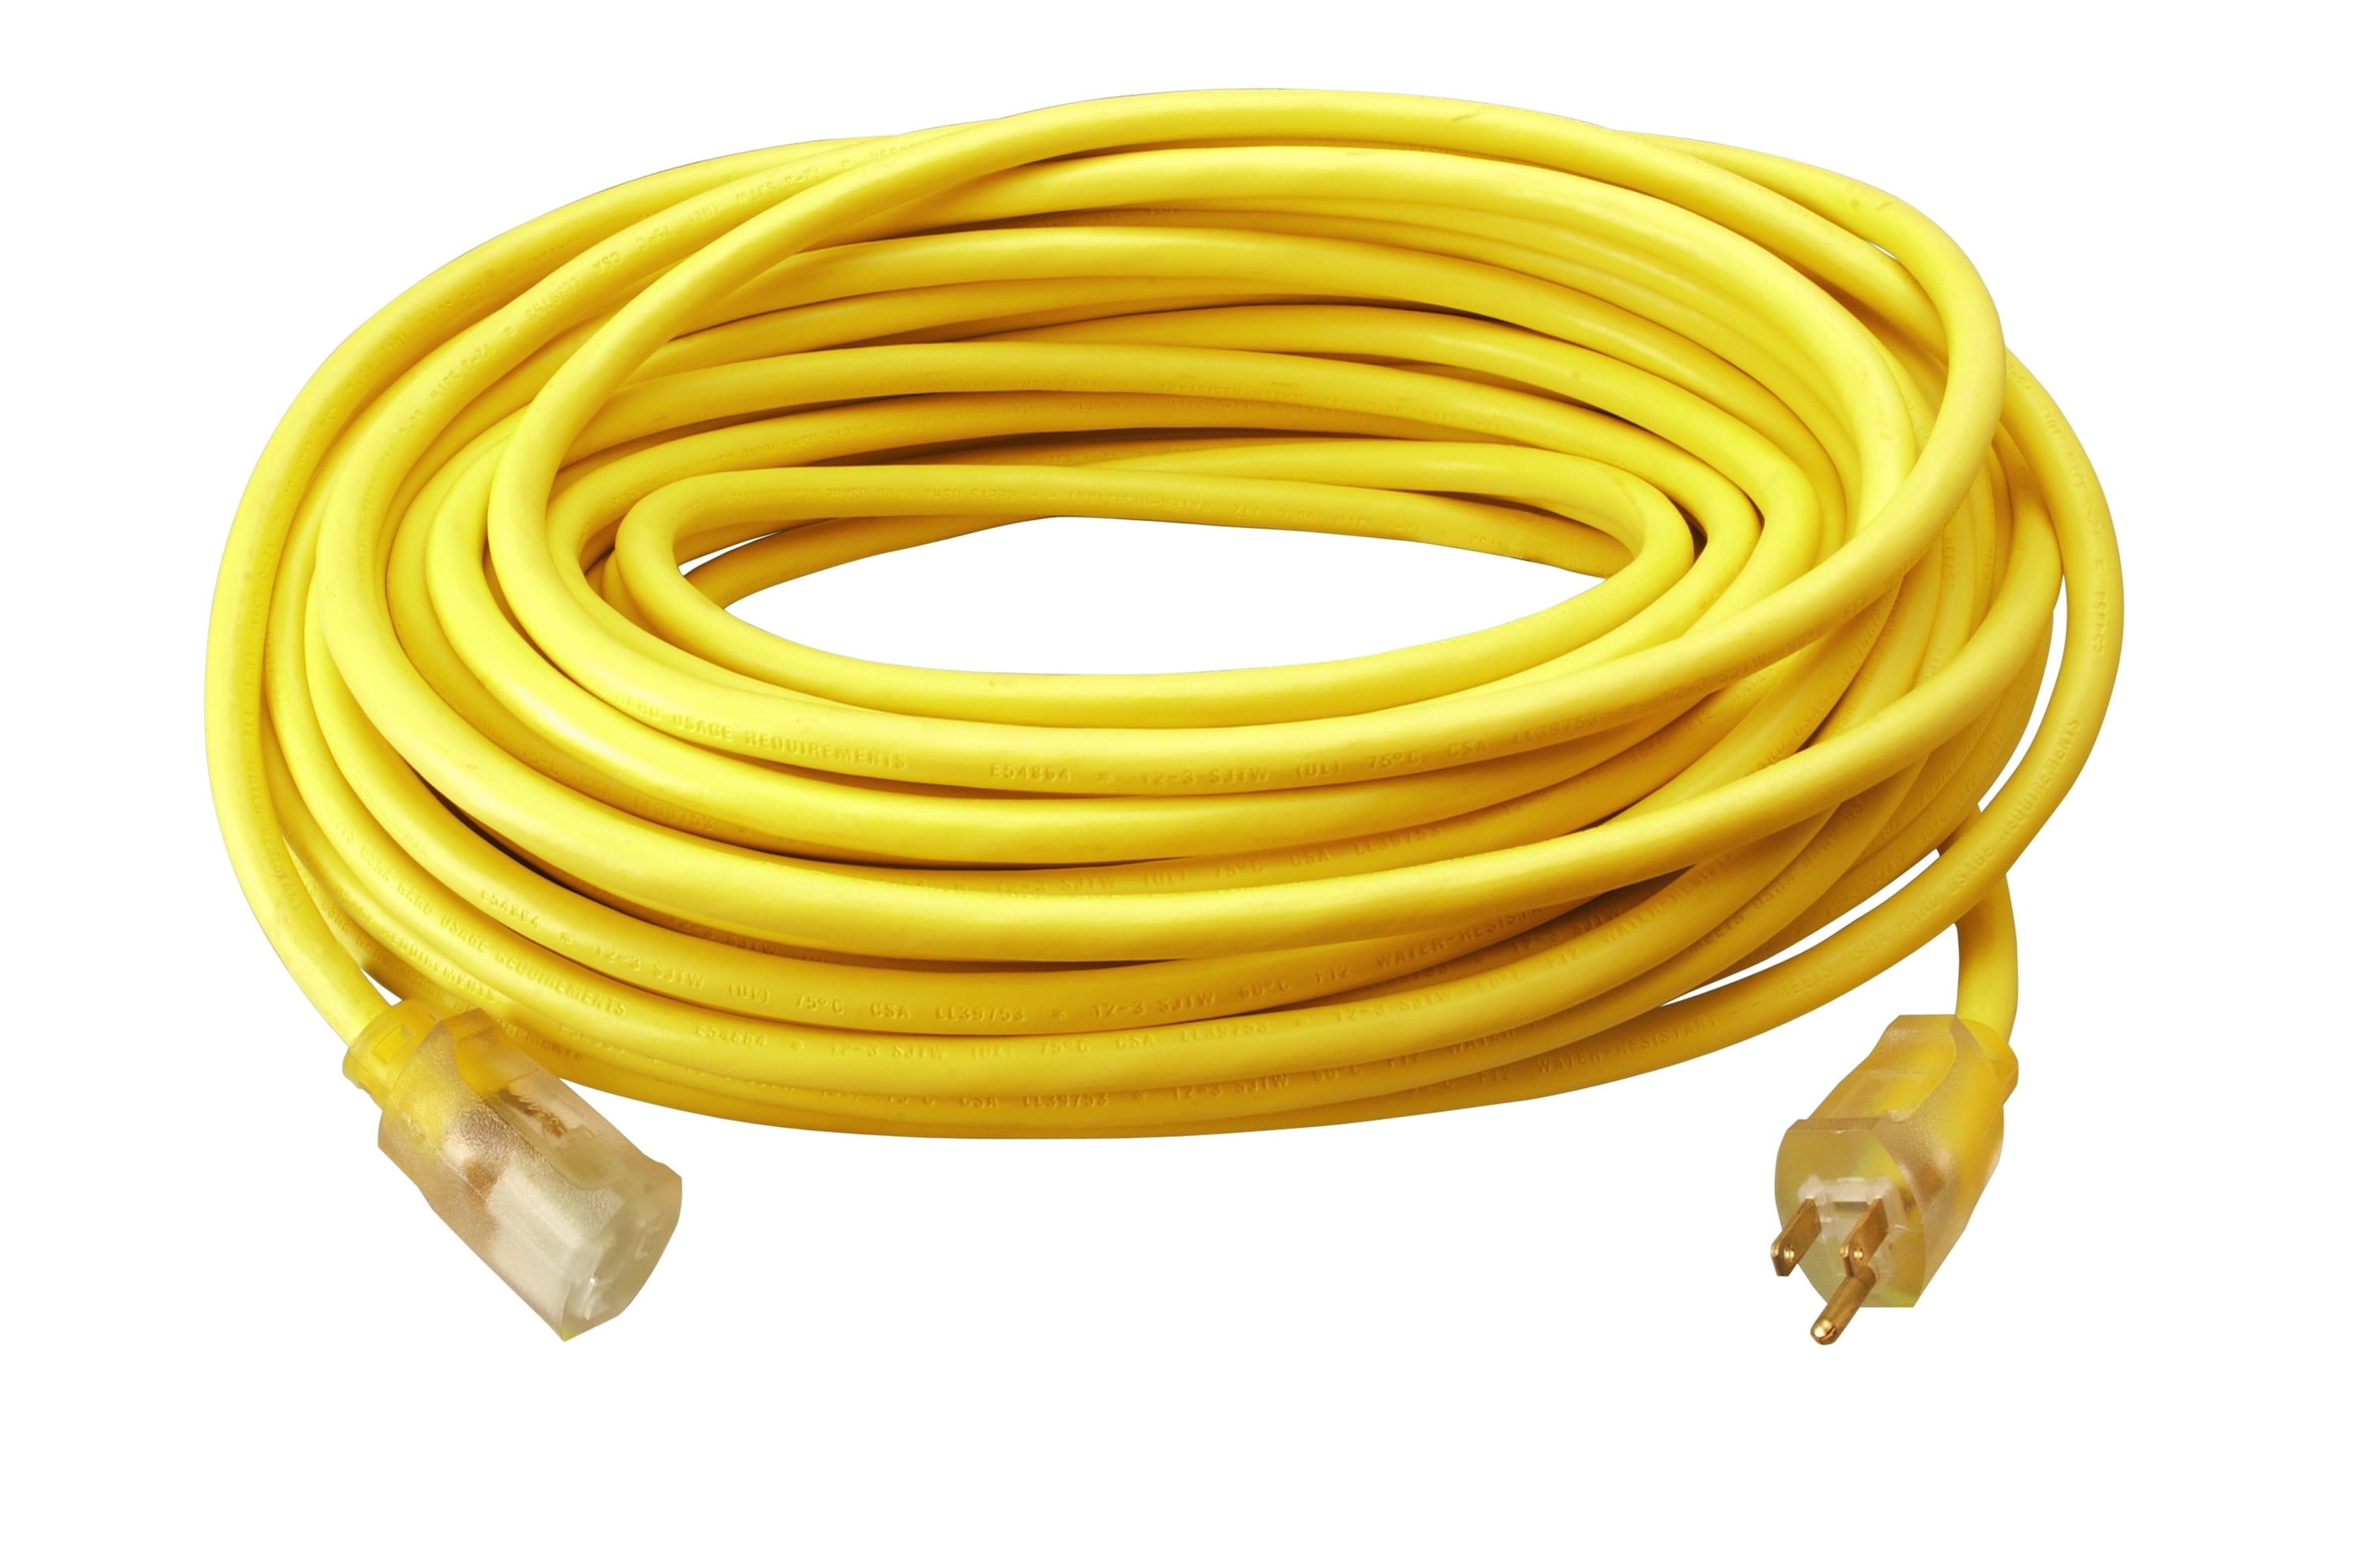 US Wire 76100 12/3 100-Foot SJTW Yellow Heavy Duty Extension Cord with Lighted Pow-R-Block